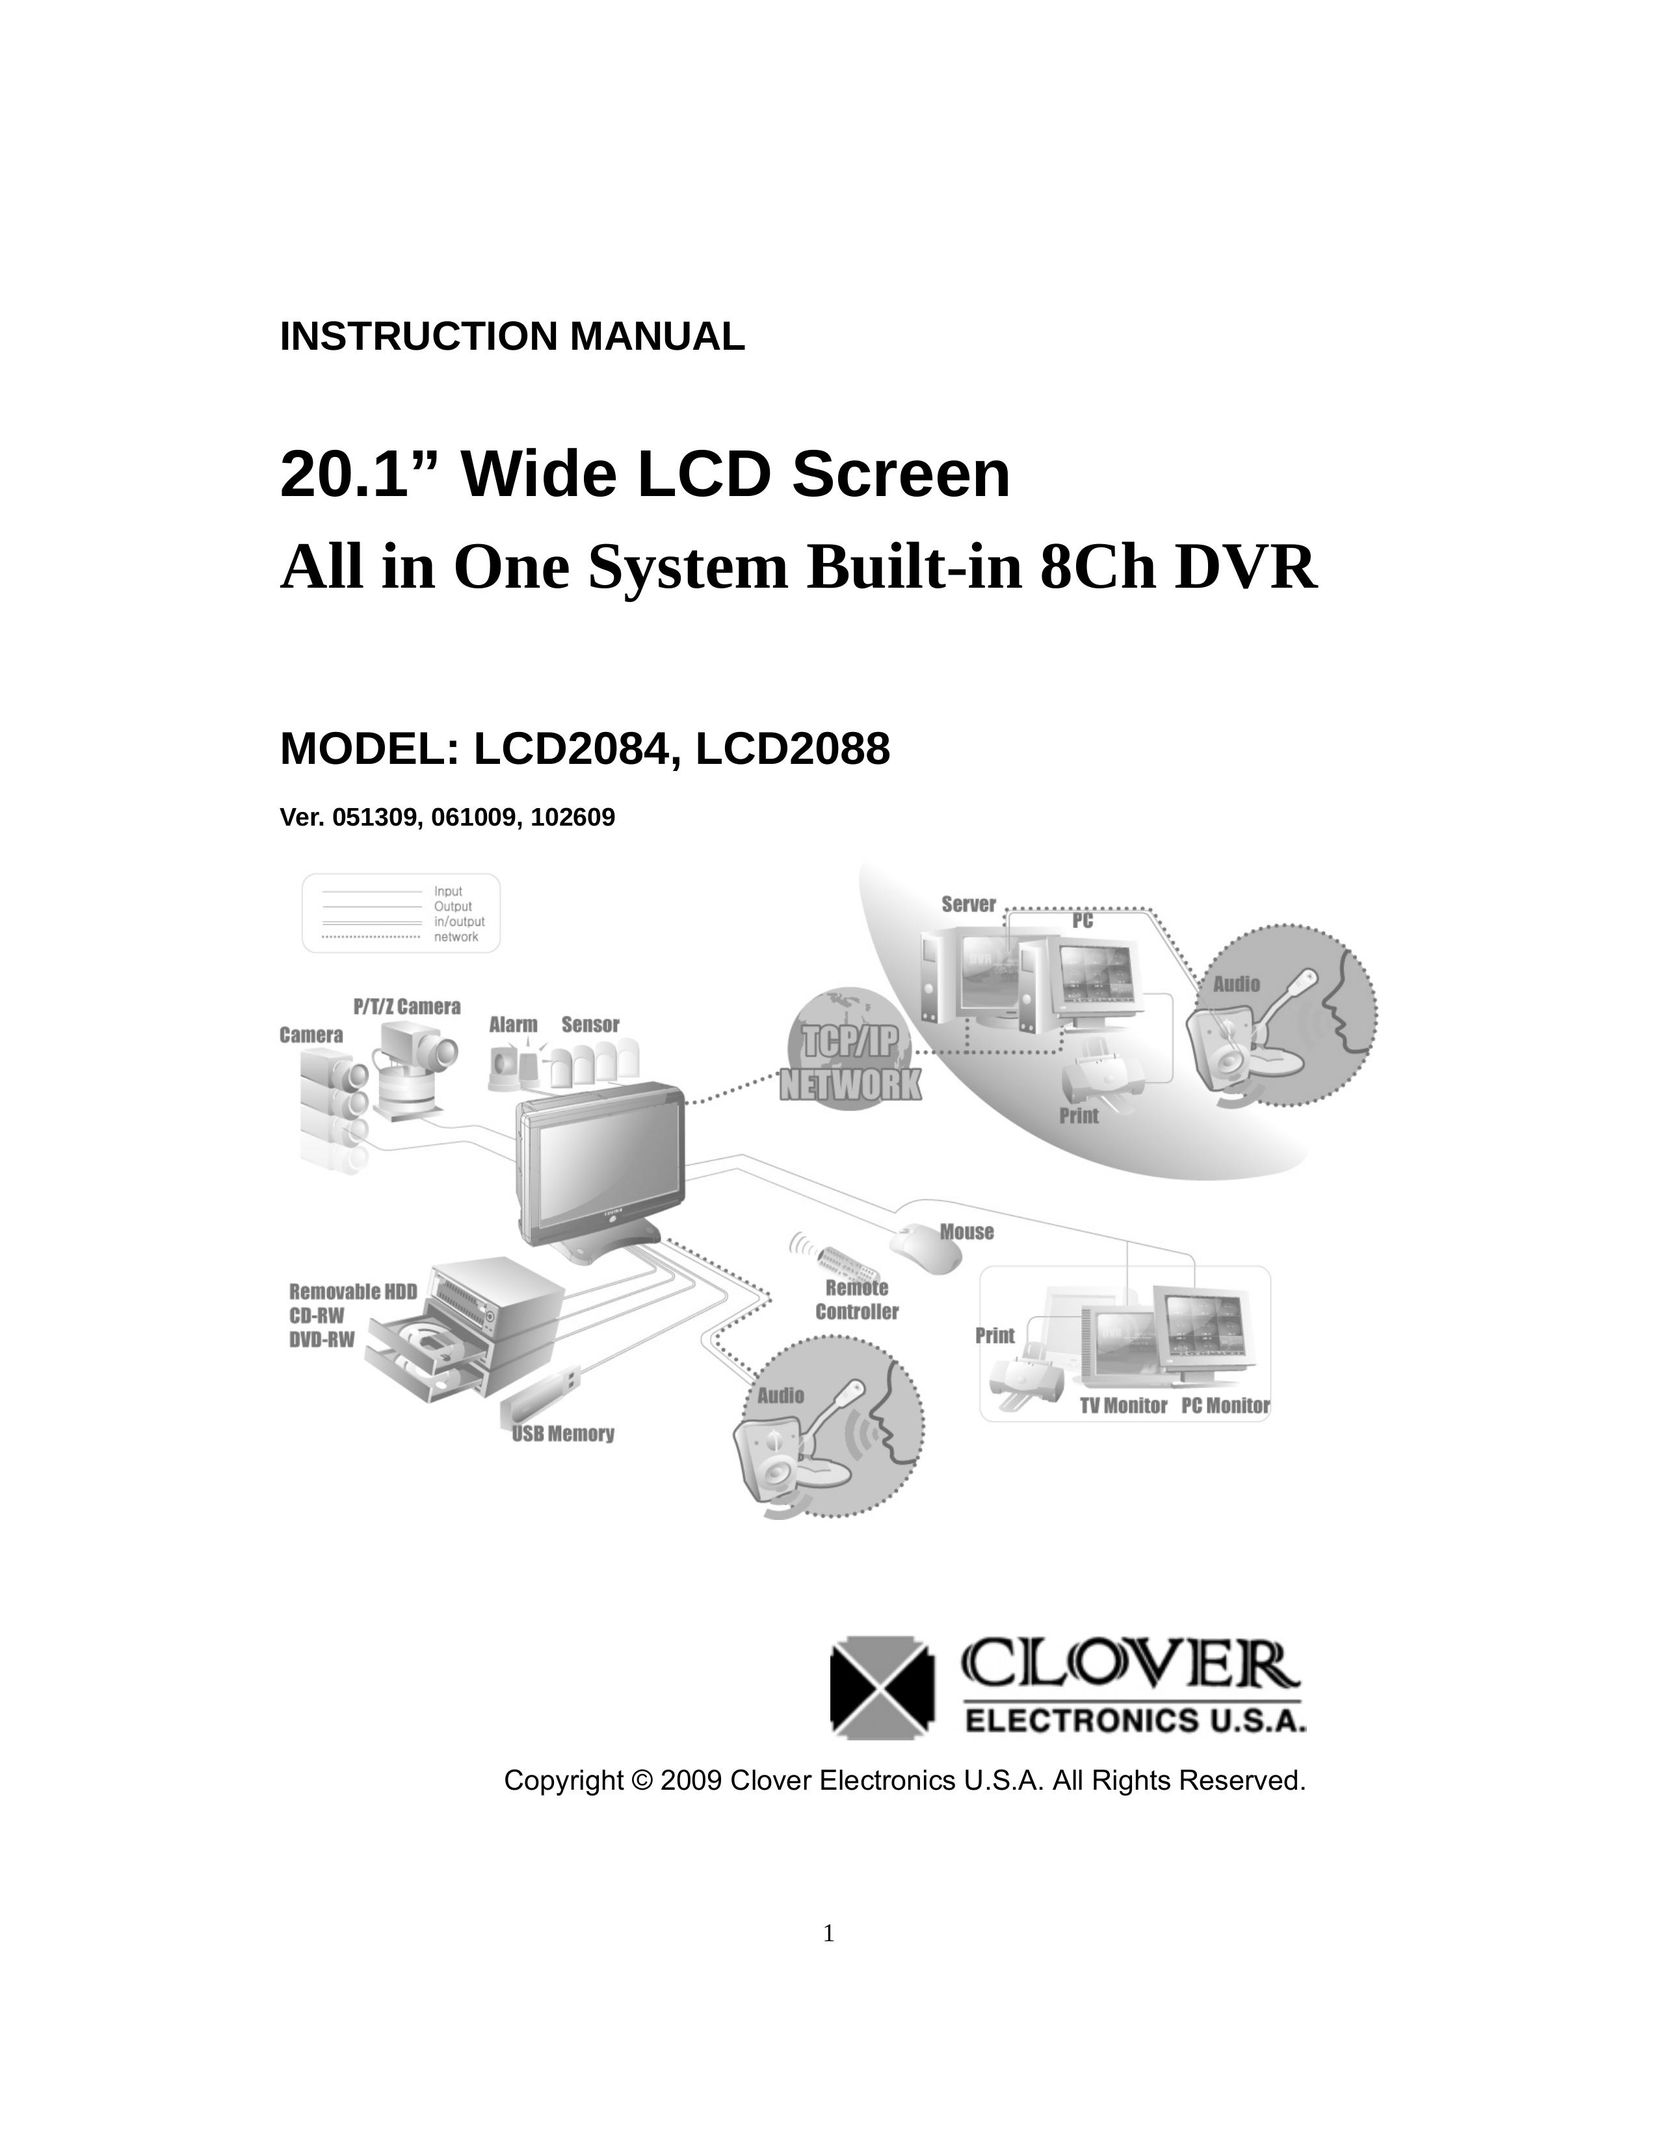 Clover Electronics LCD2084 Flat Panel Television User Manual